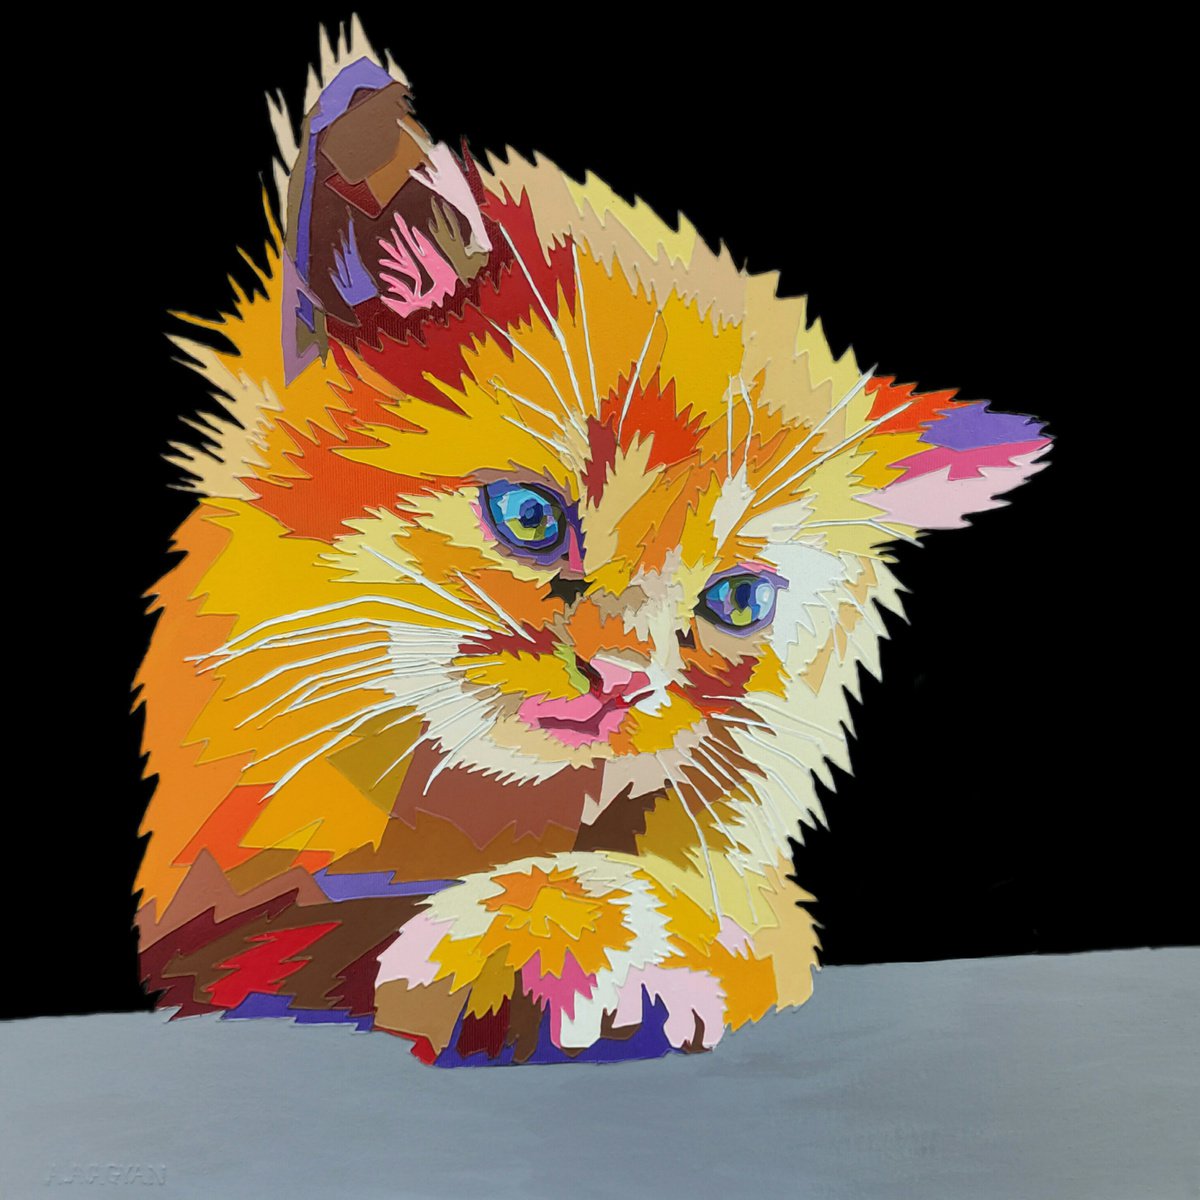 Kitten - |Unique style of painting| by Ash Avagyan